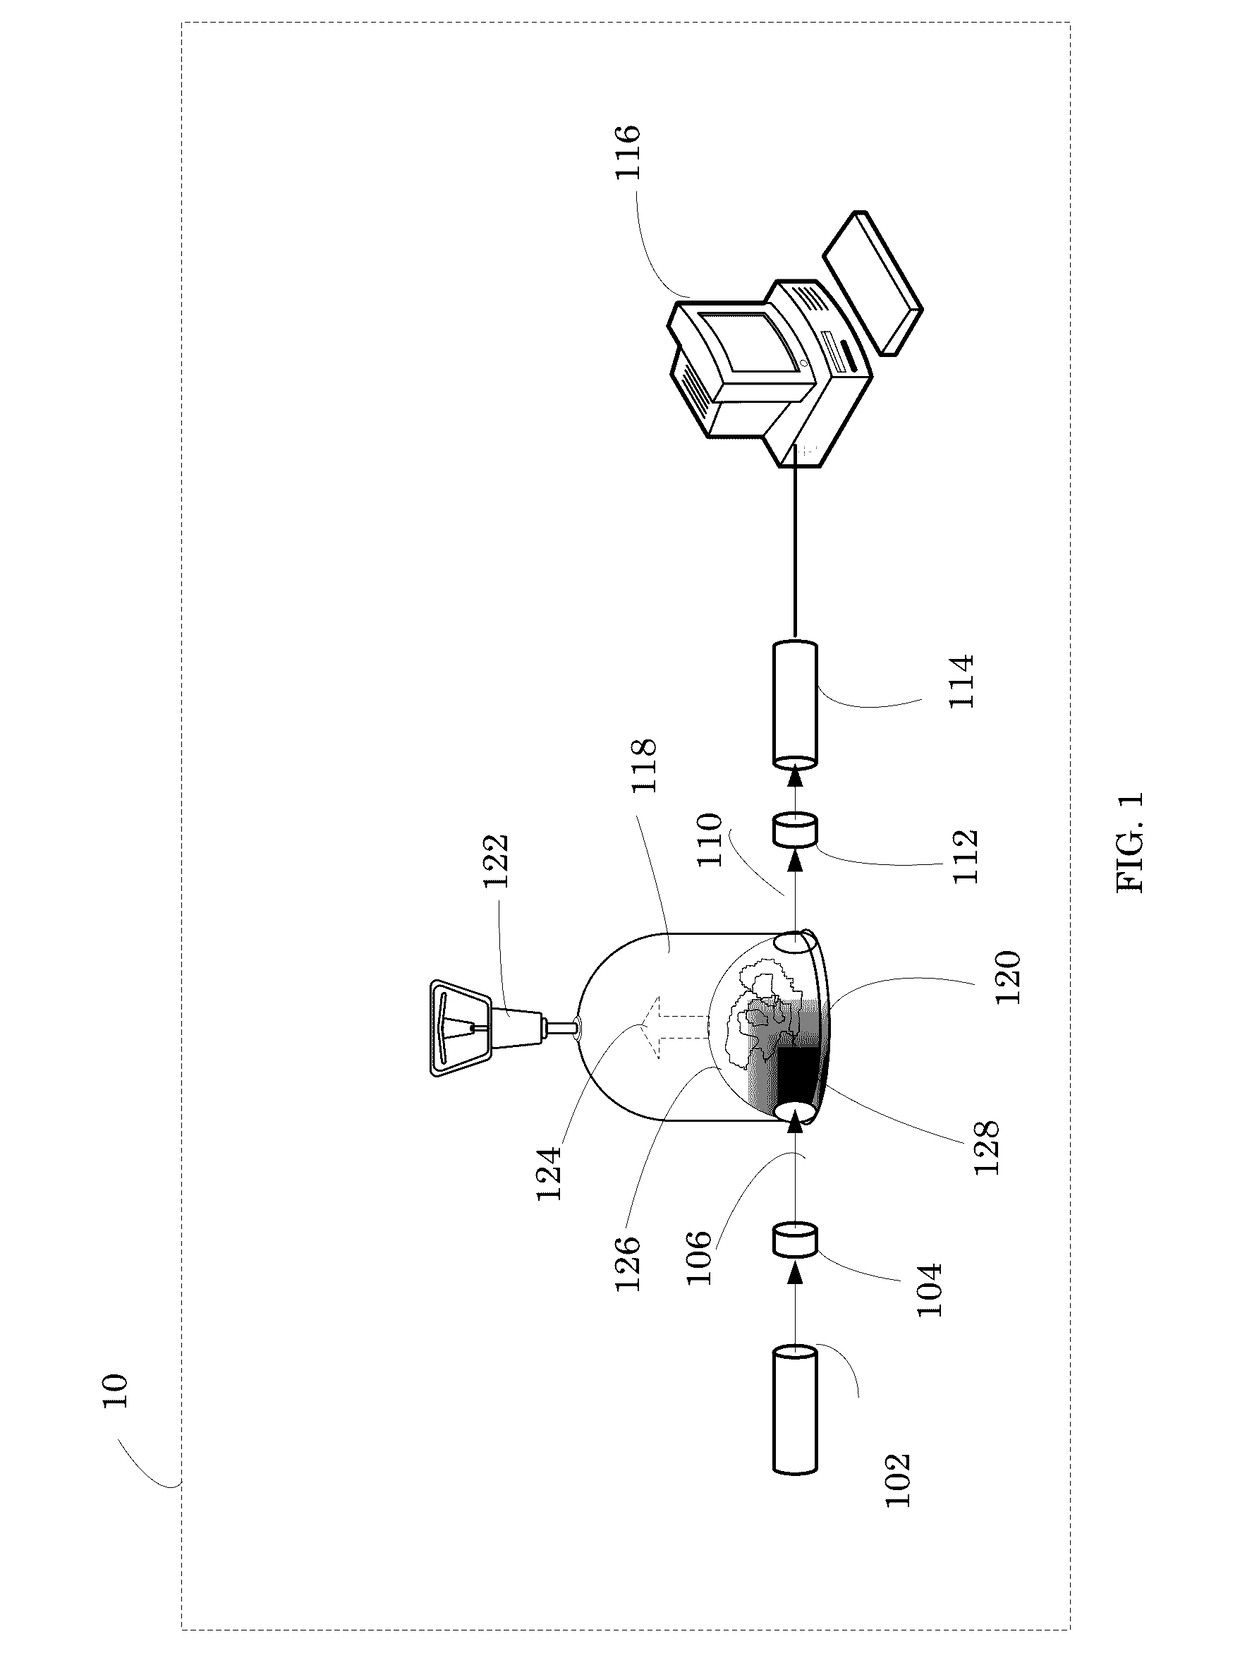 Method and apparatus of non-invasive biological sensing using controlled suction device